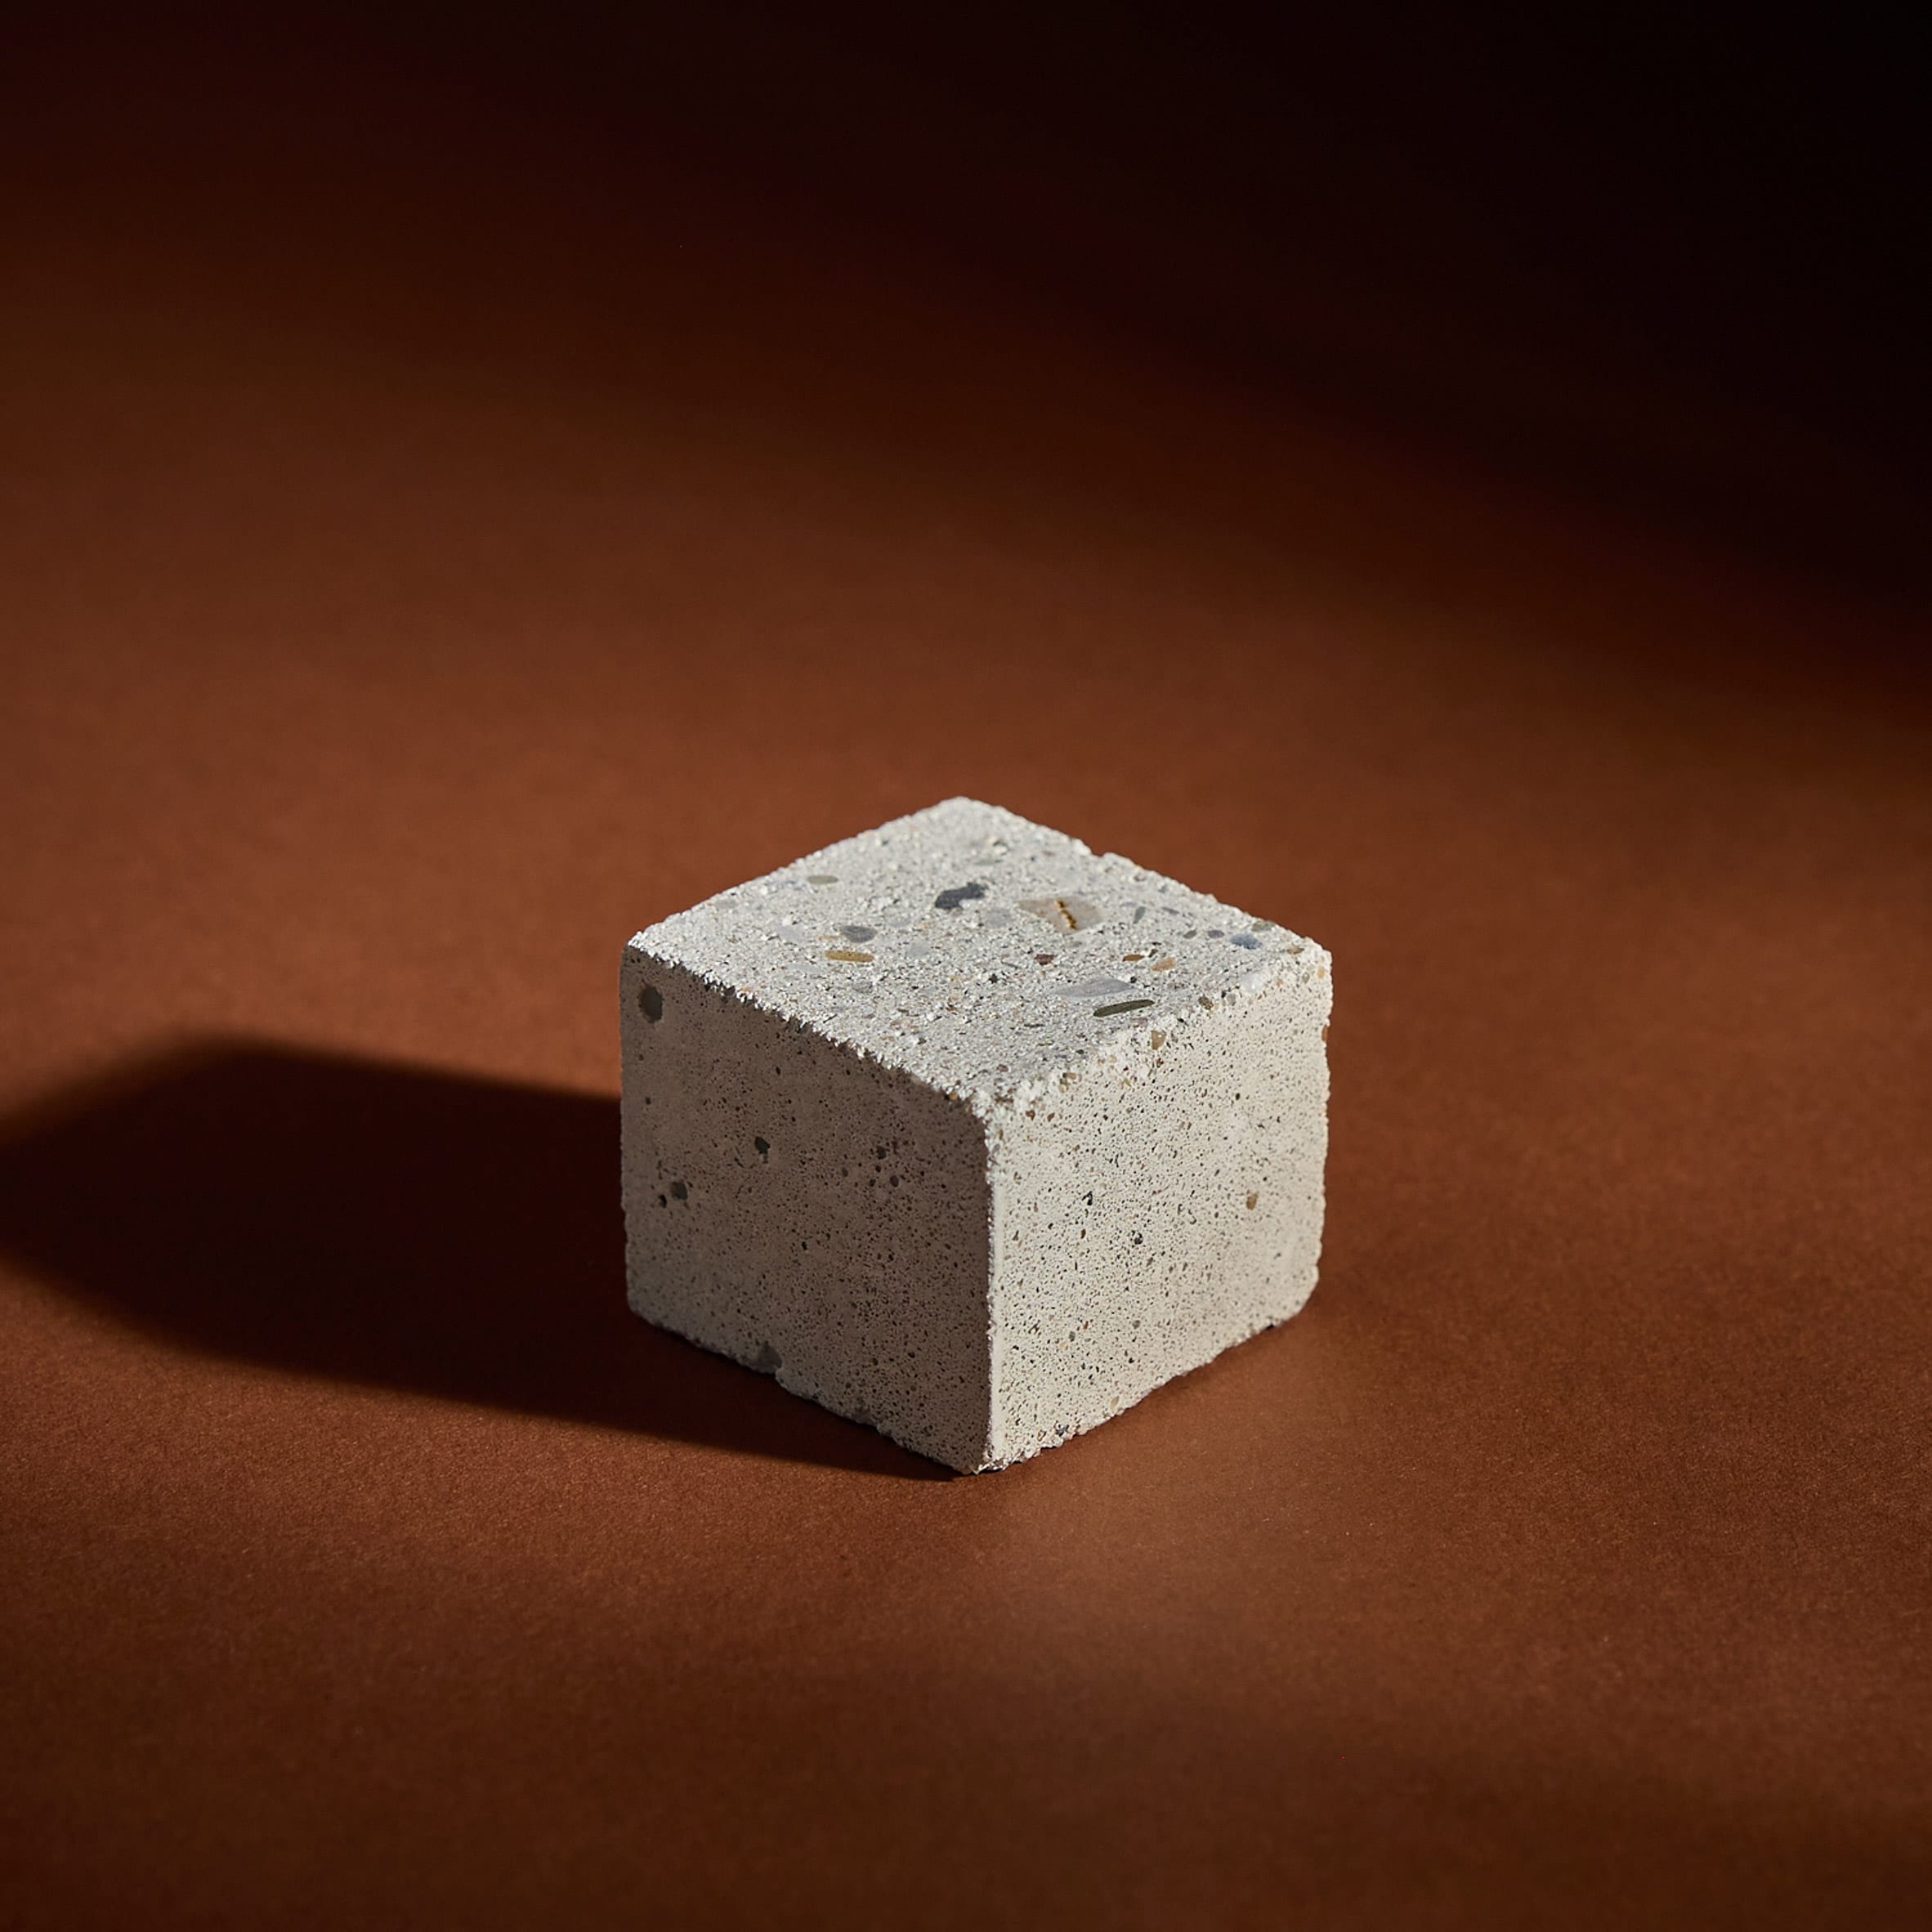 Concrete made from olivine by Green Materials